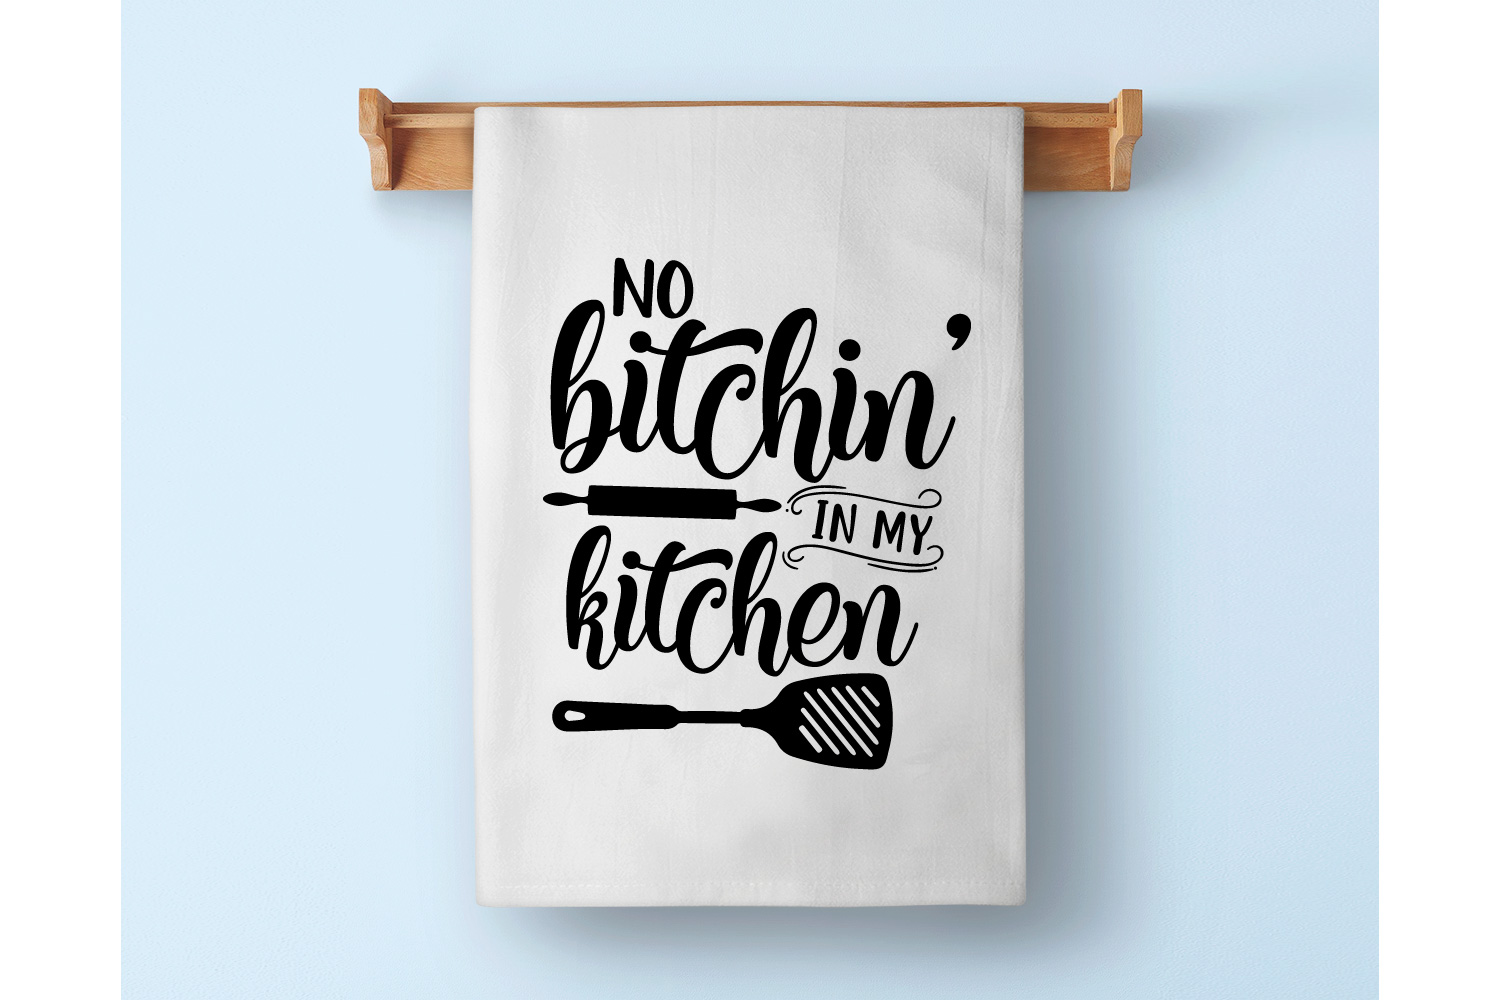 kitchen quotes svg free